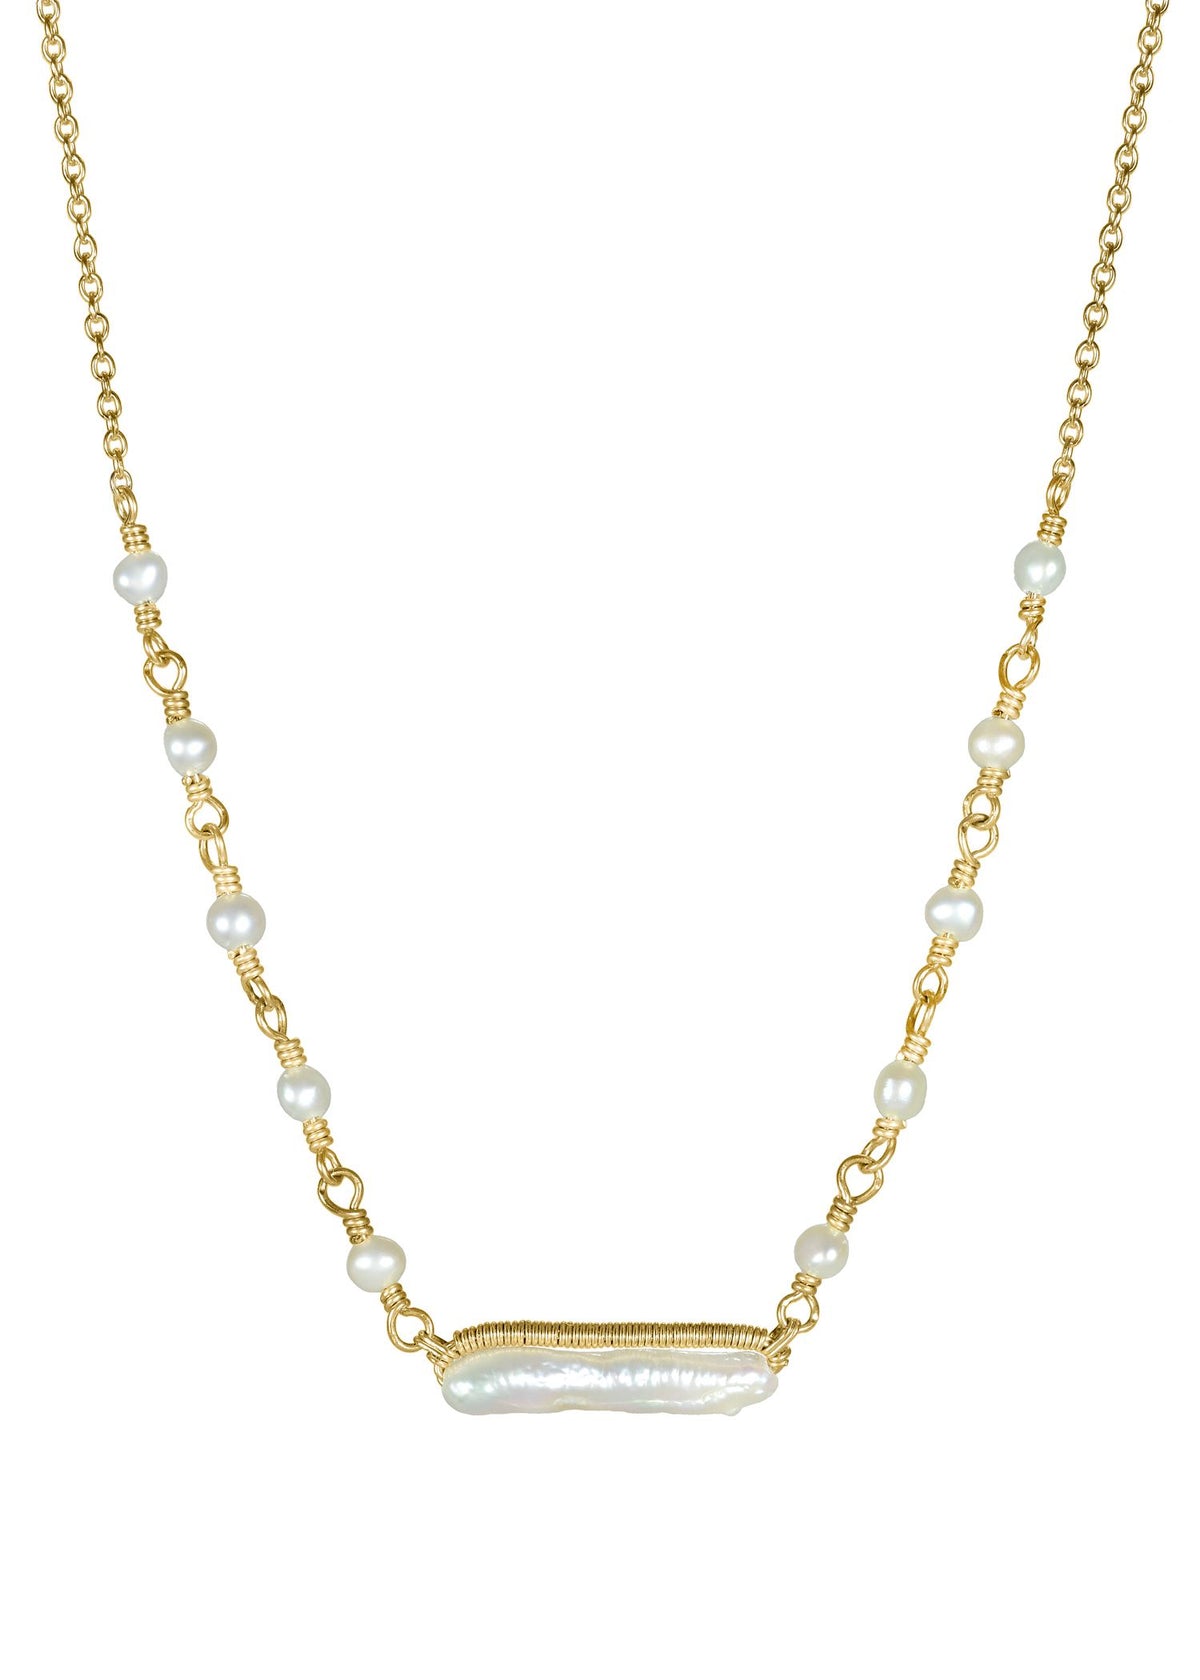 Freshwater pearl 14k gold fill Necklace measures 16-1/2” in length Pendant measures 3/16” in length and 11/16” in width Handmade in our Los Angeles studio